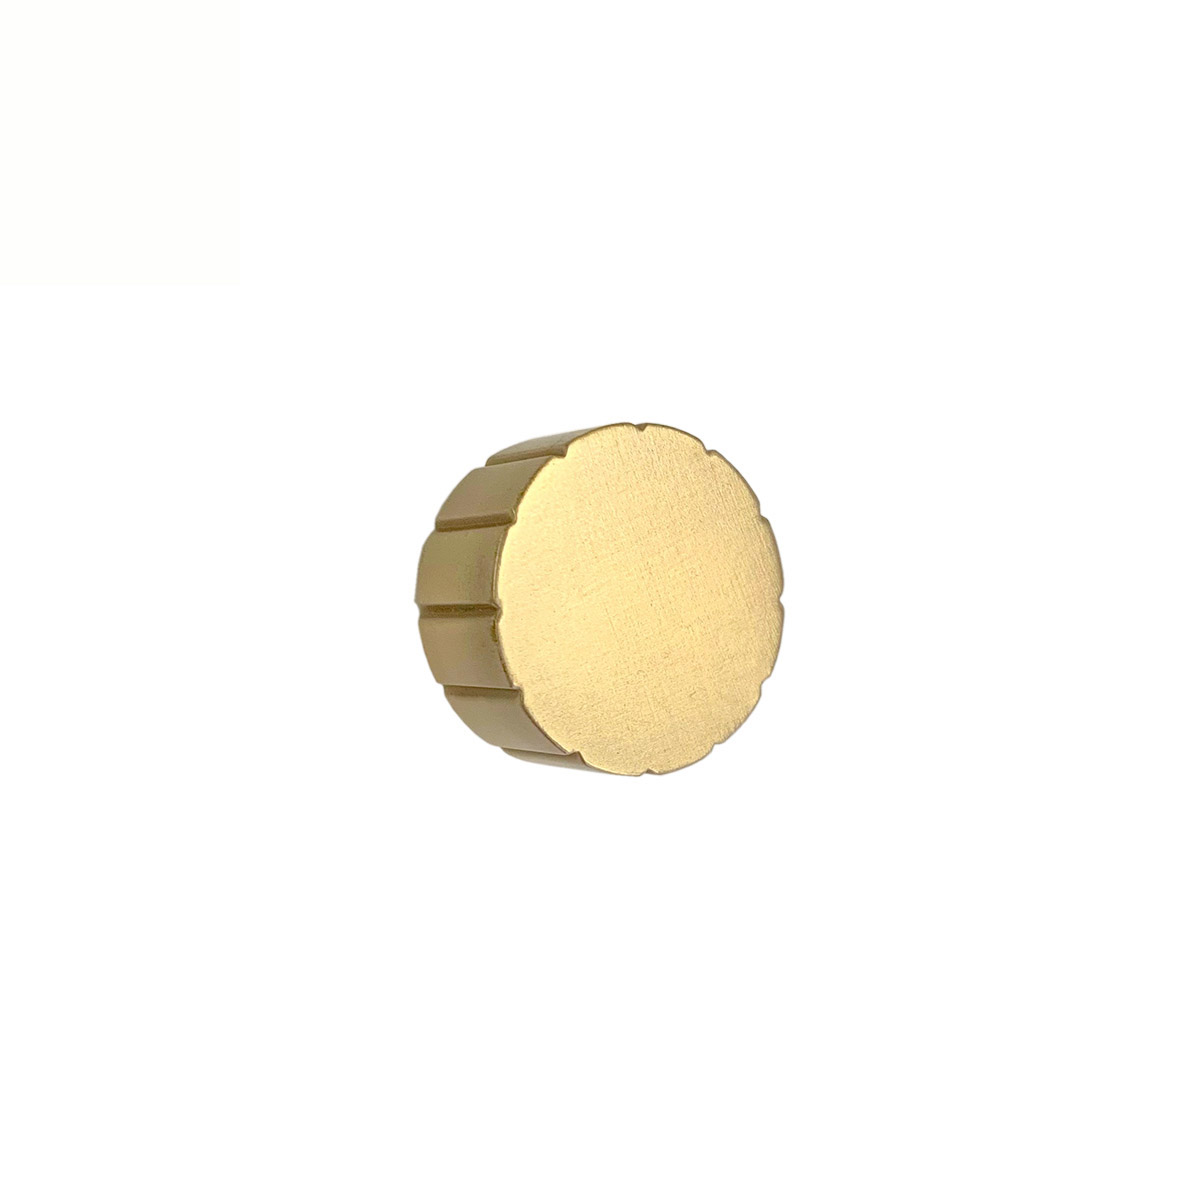 Solid Bronze Brentwood 1.25 inch Cabinet Knob